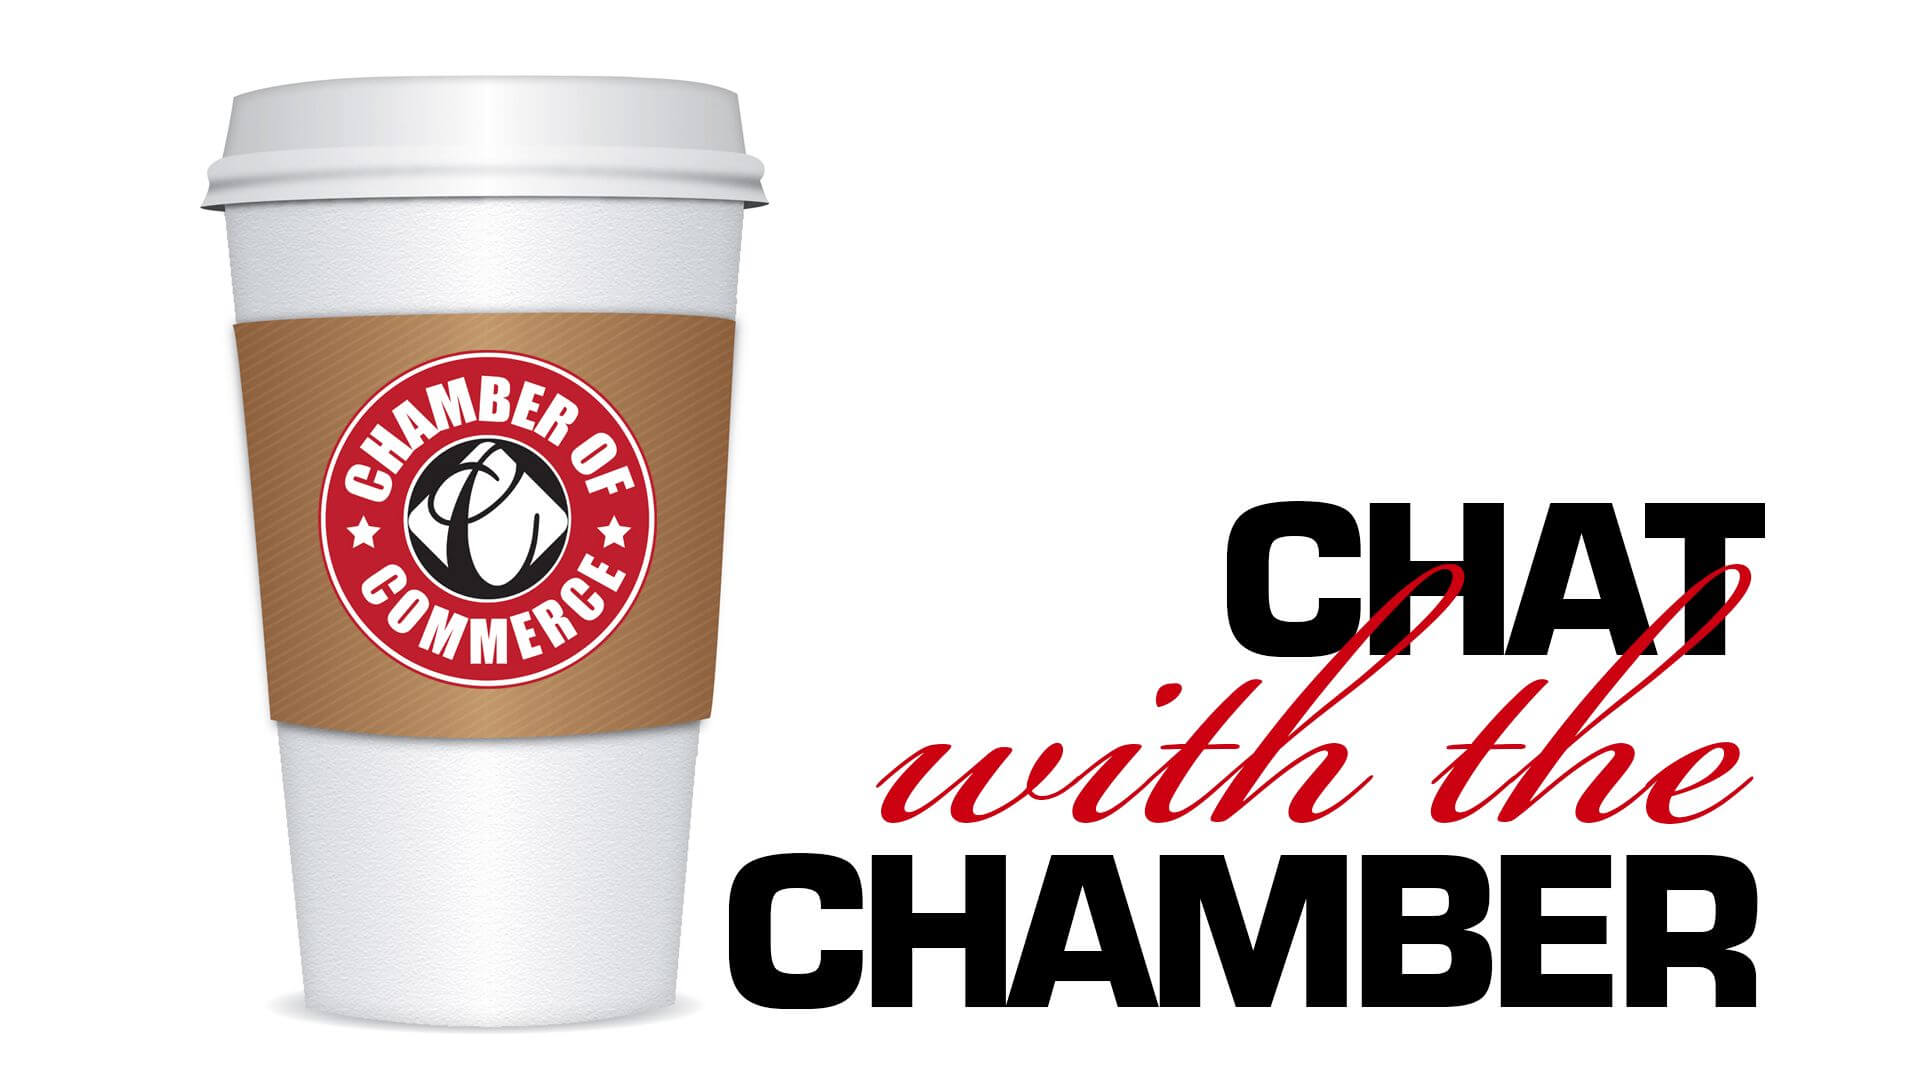 Chat with Chamber graphic.